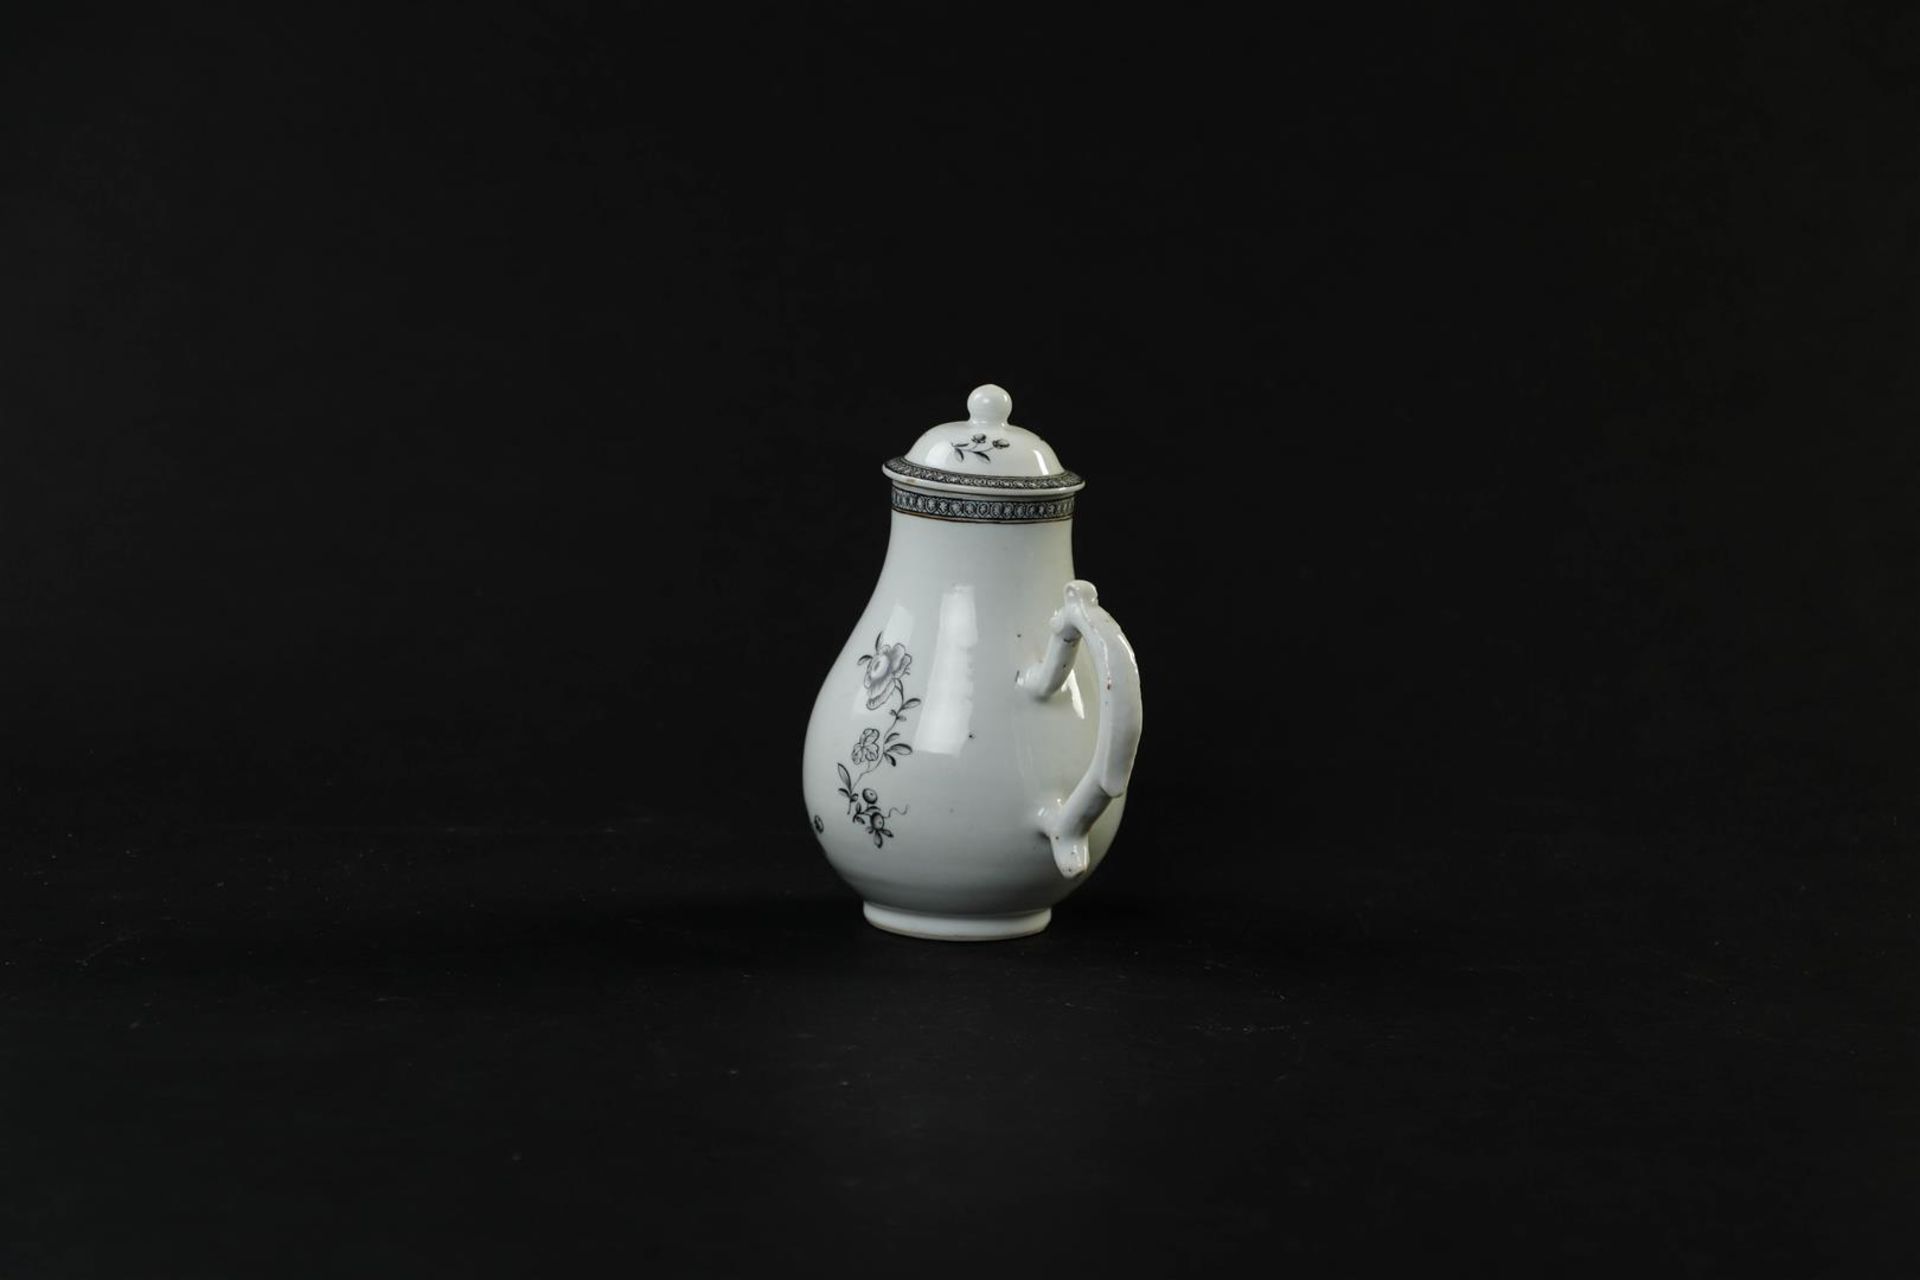 An Encre de Chine tableware set consisting of a teapot, milk jug, tea caddy, patty pan and spoon tra - Image 10 of 24